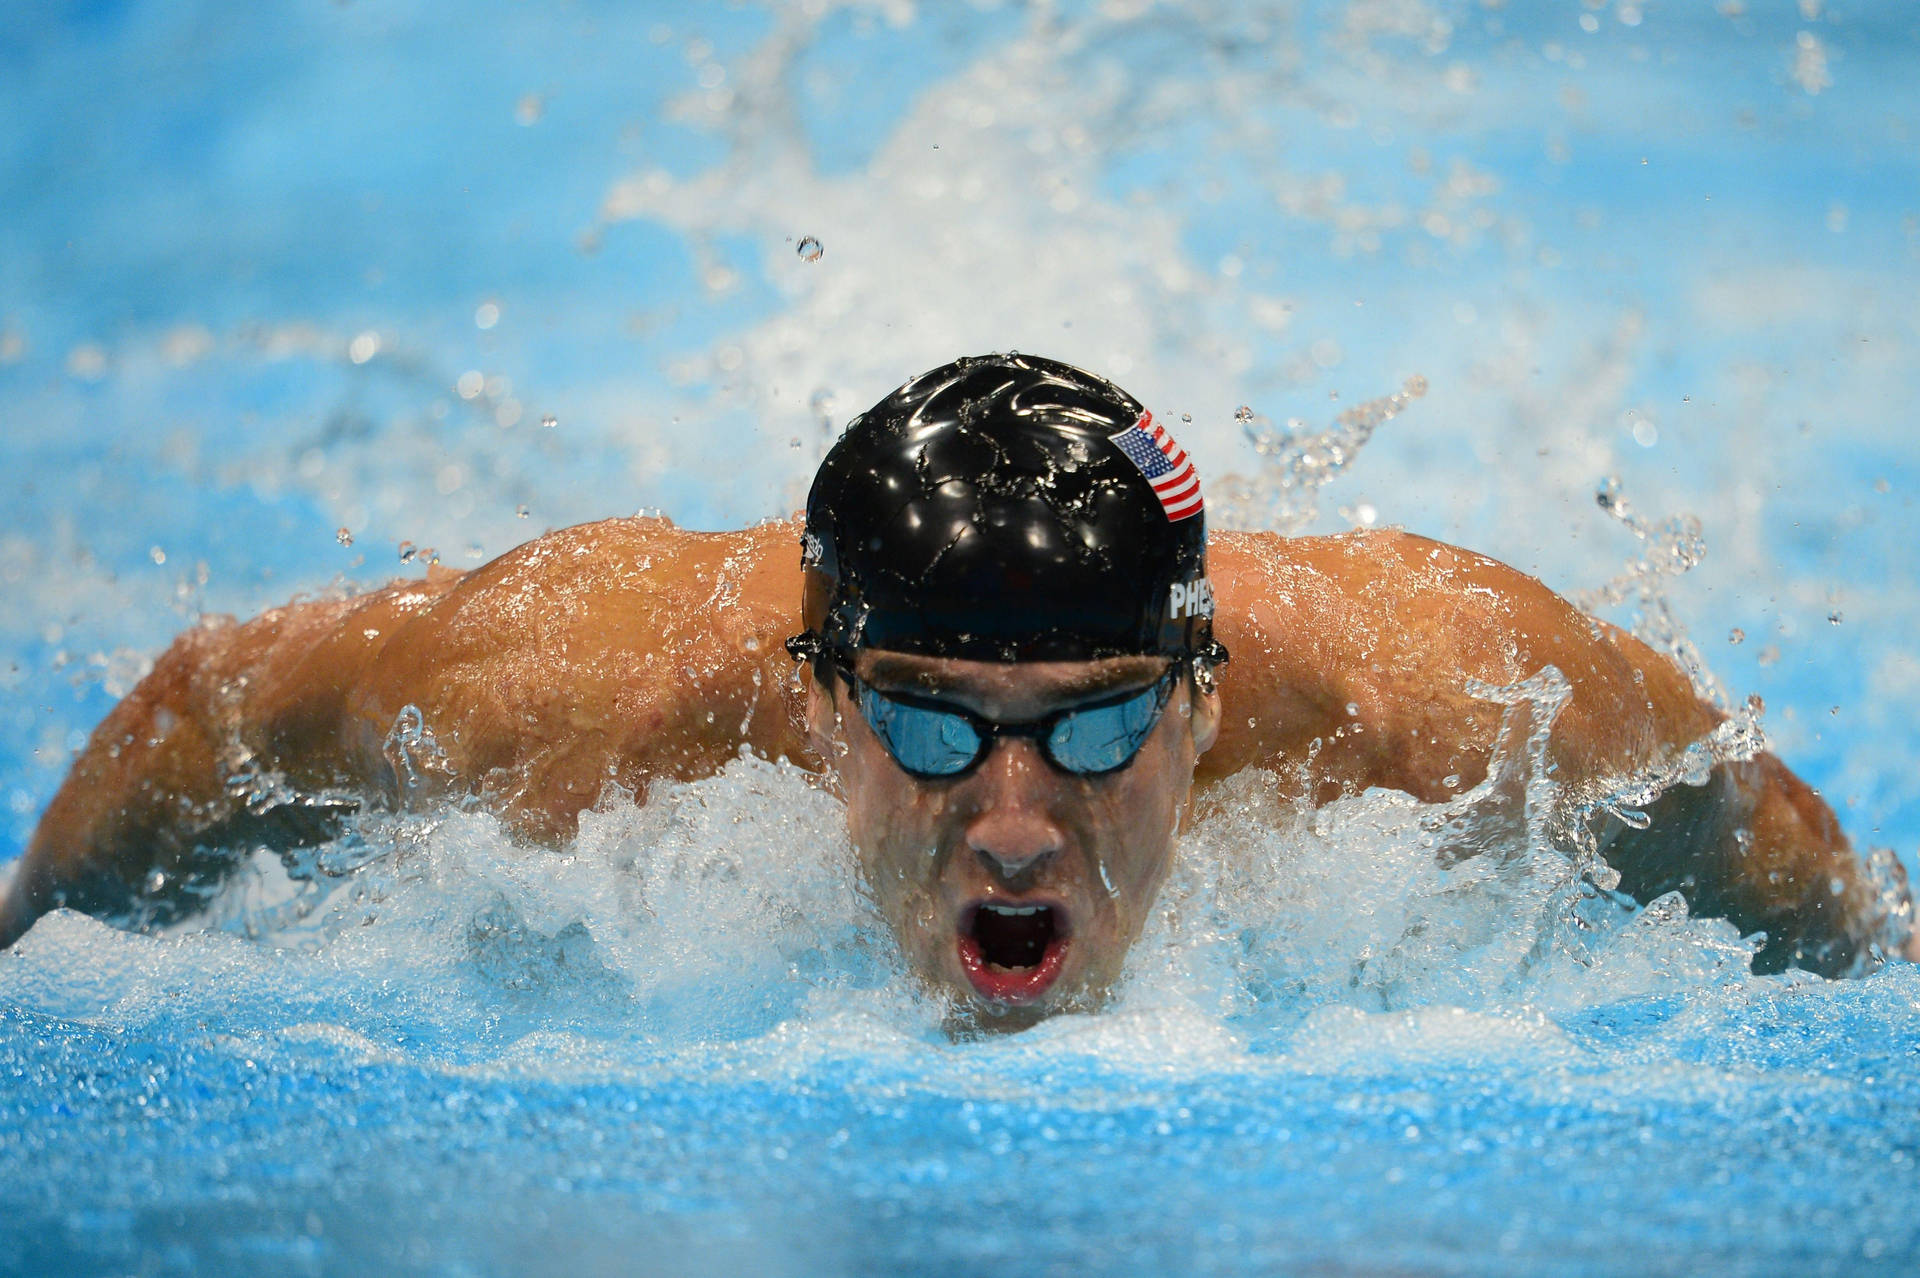 "Champion Swimmer Michael Phelps in the Olympics" Wallpaper